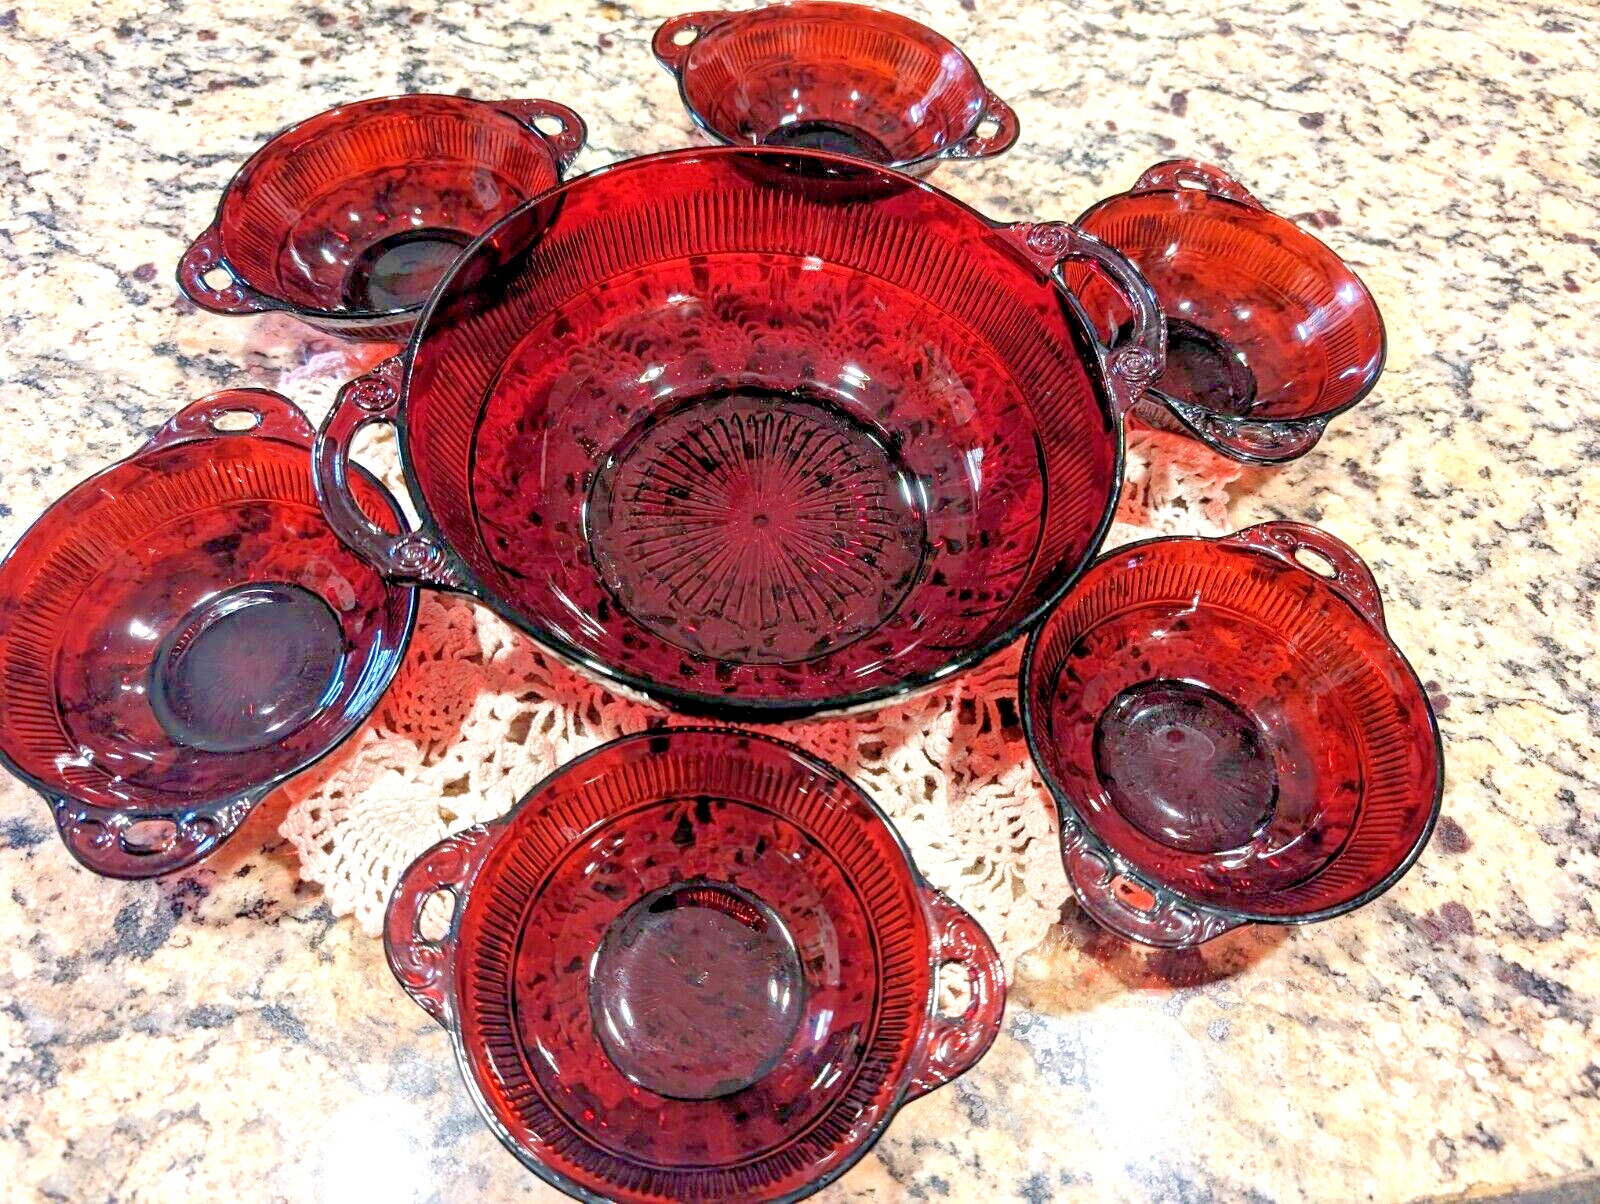 Vtg 1940s ANCHOR HOCKING ROYAL RUBY RED CORONATION PATTERN 1 BOWL 6 BERRY DISHES